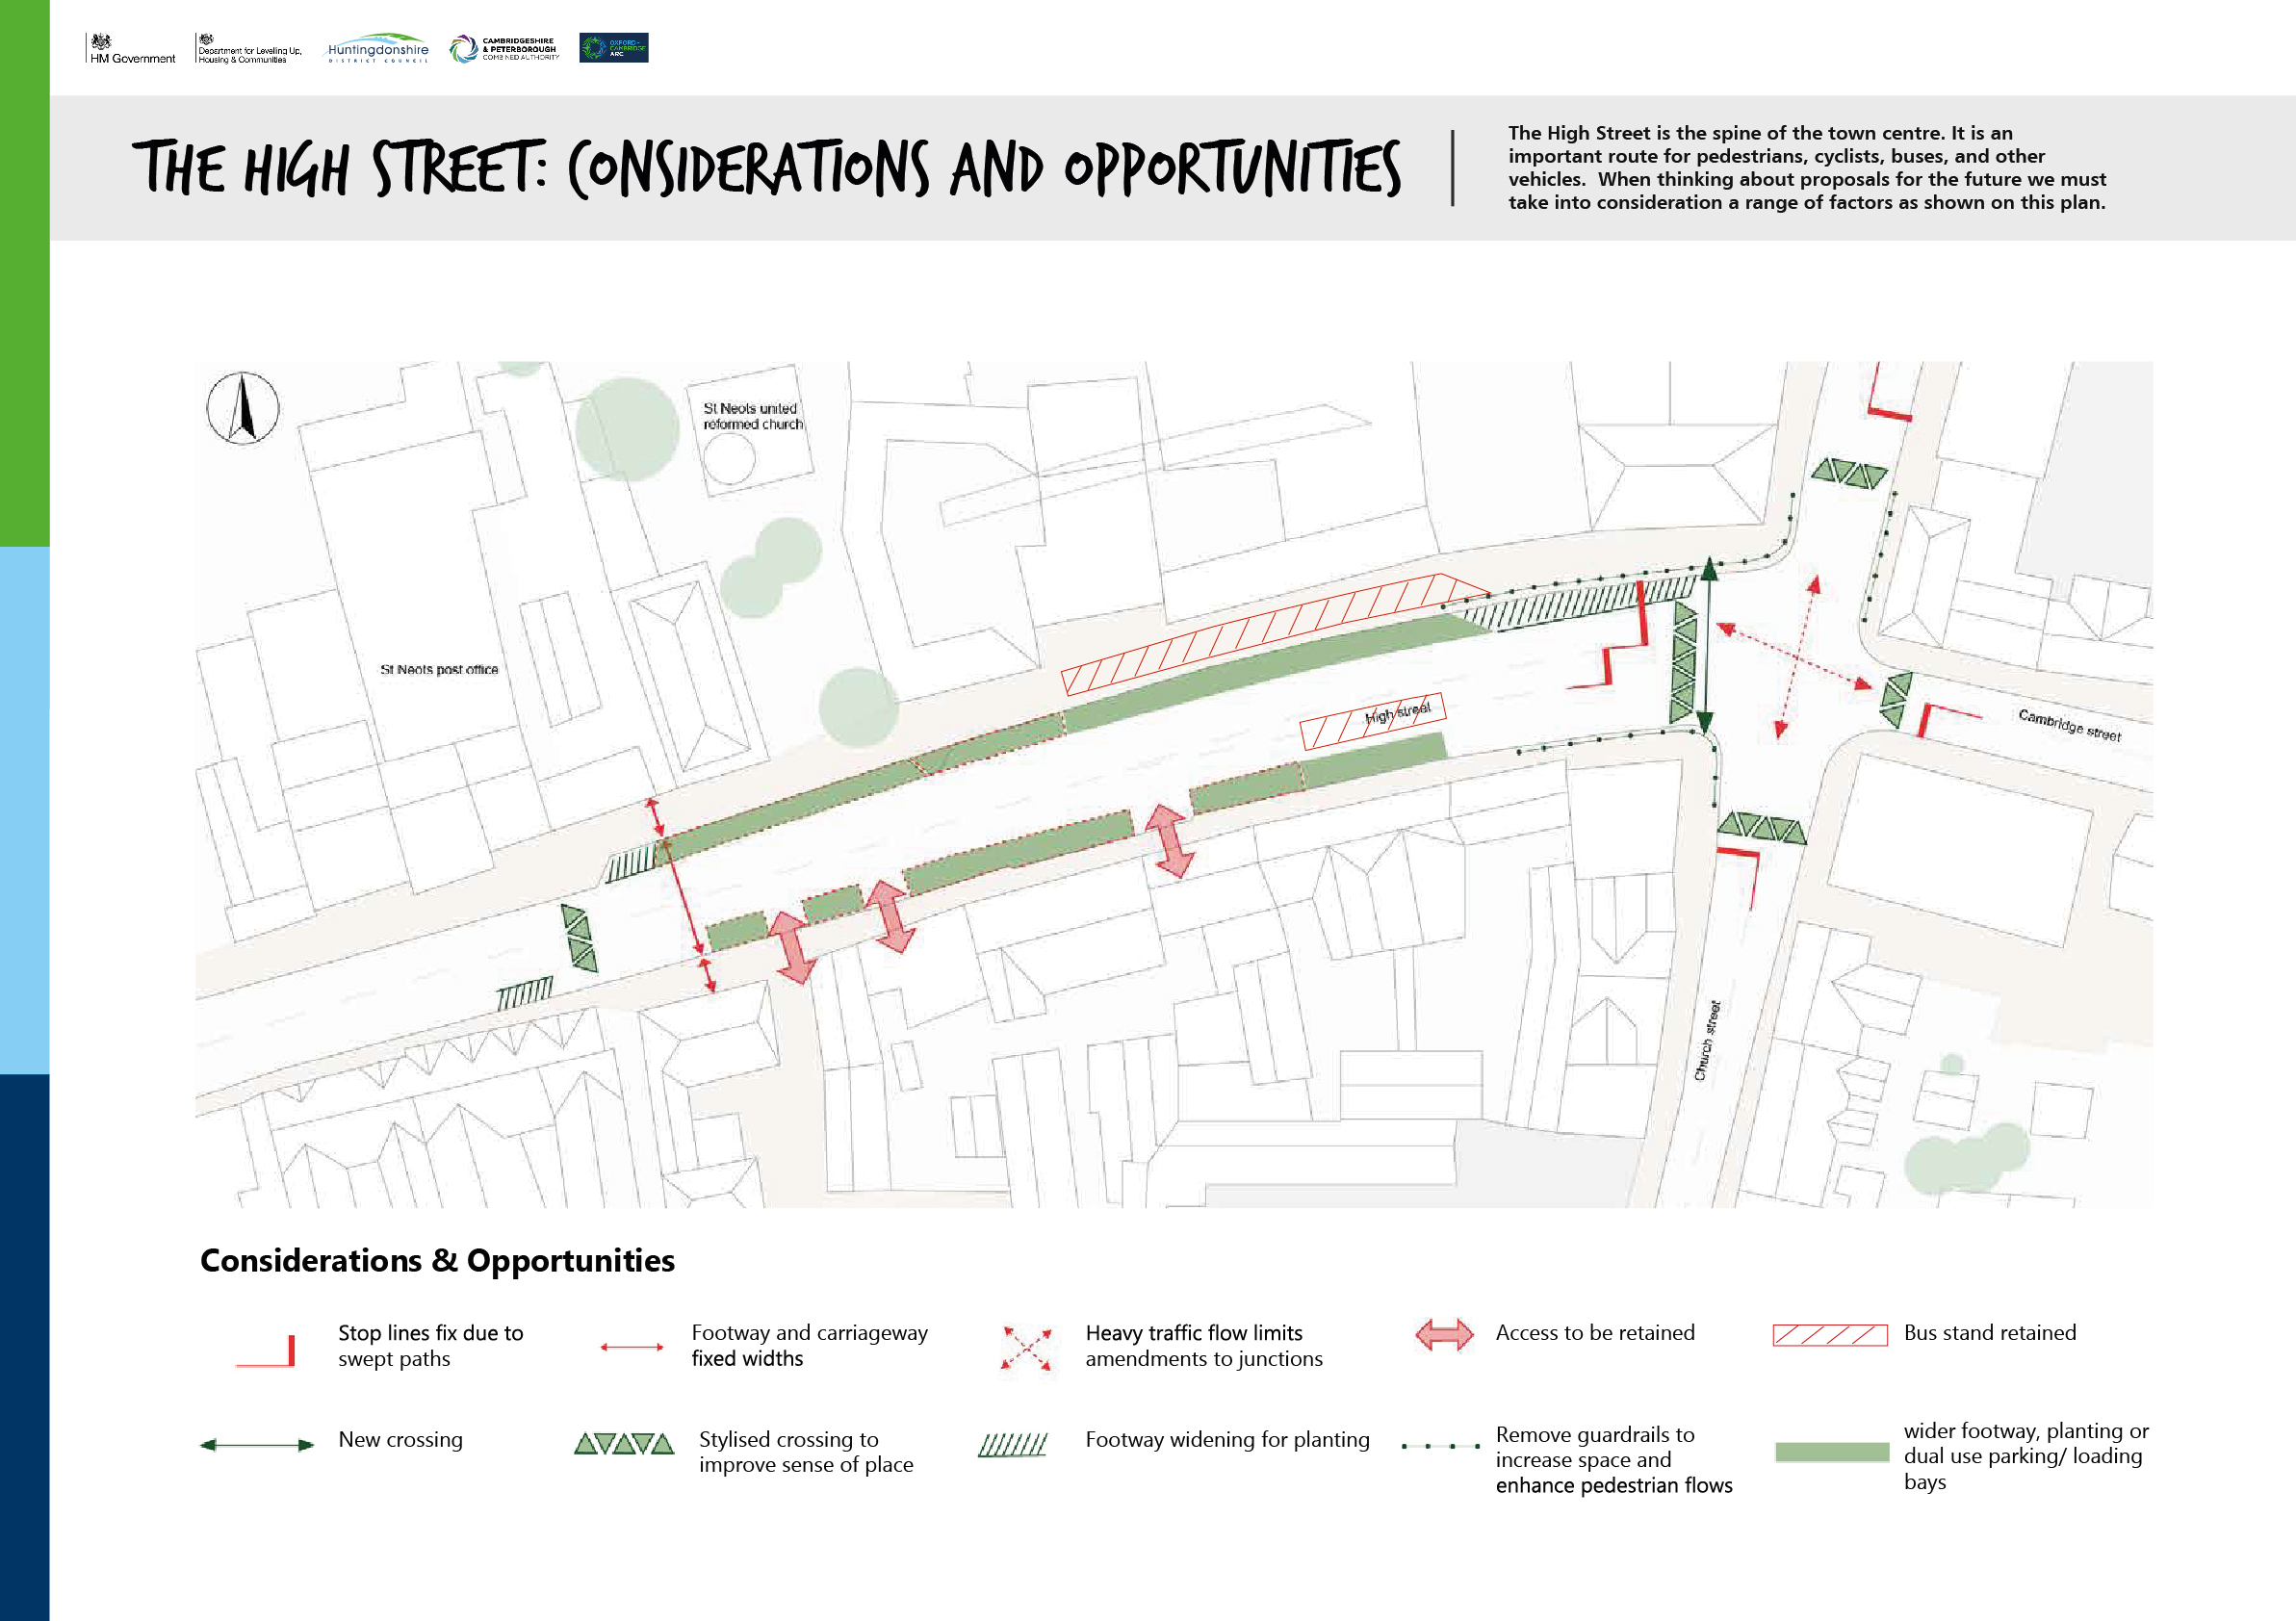 The High Street: Considerations and opportunities The High Street is the spine of the town centre. It is an important route for pedestrians, cyclists, buses, and other vehicles. When thinking about proposals for the future we must take into consideration a range of factors as shown on this plan. Image of map showing considerations and opportunities